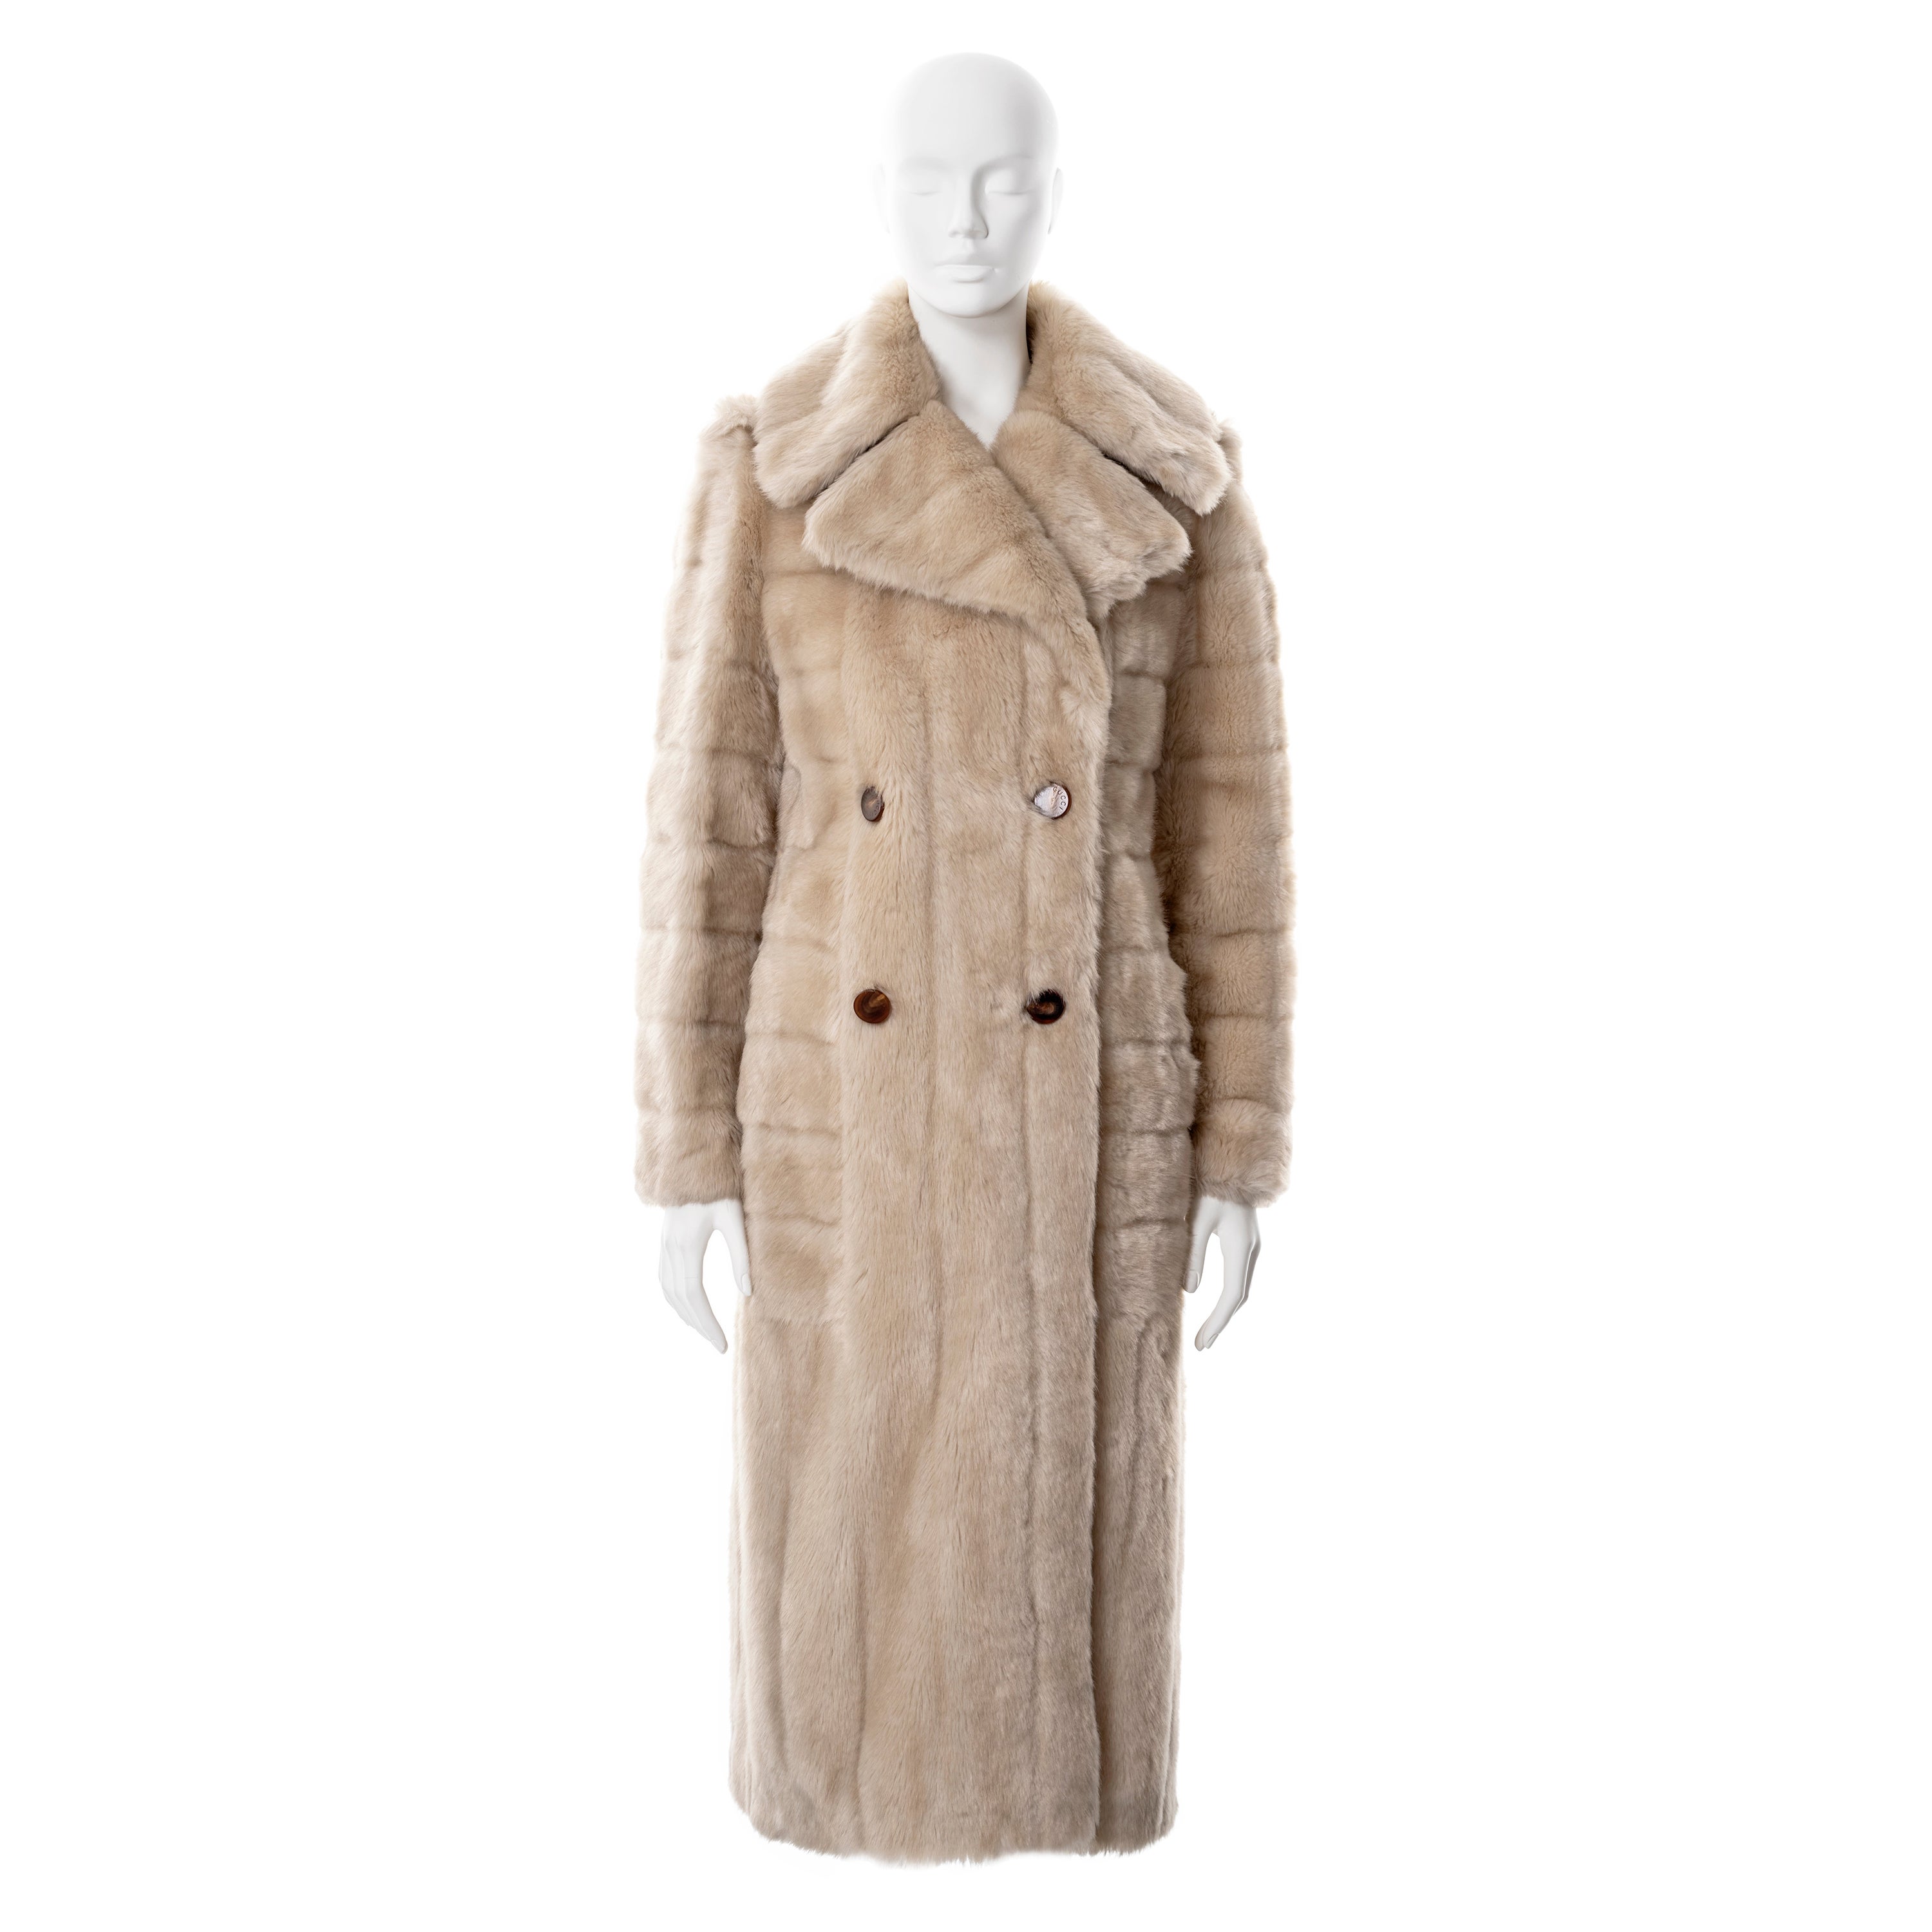 Gucci by Tom Ford cream faux fur double-breasted coat, fw 1996